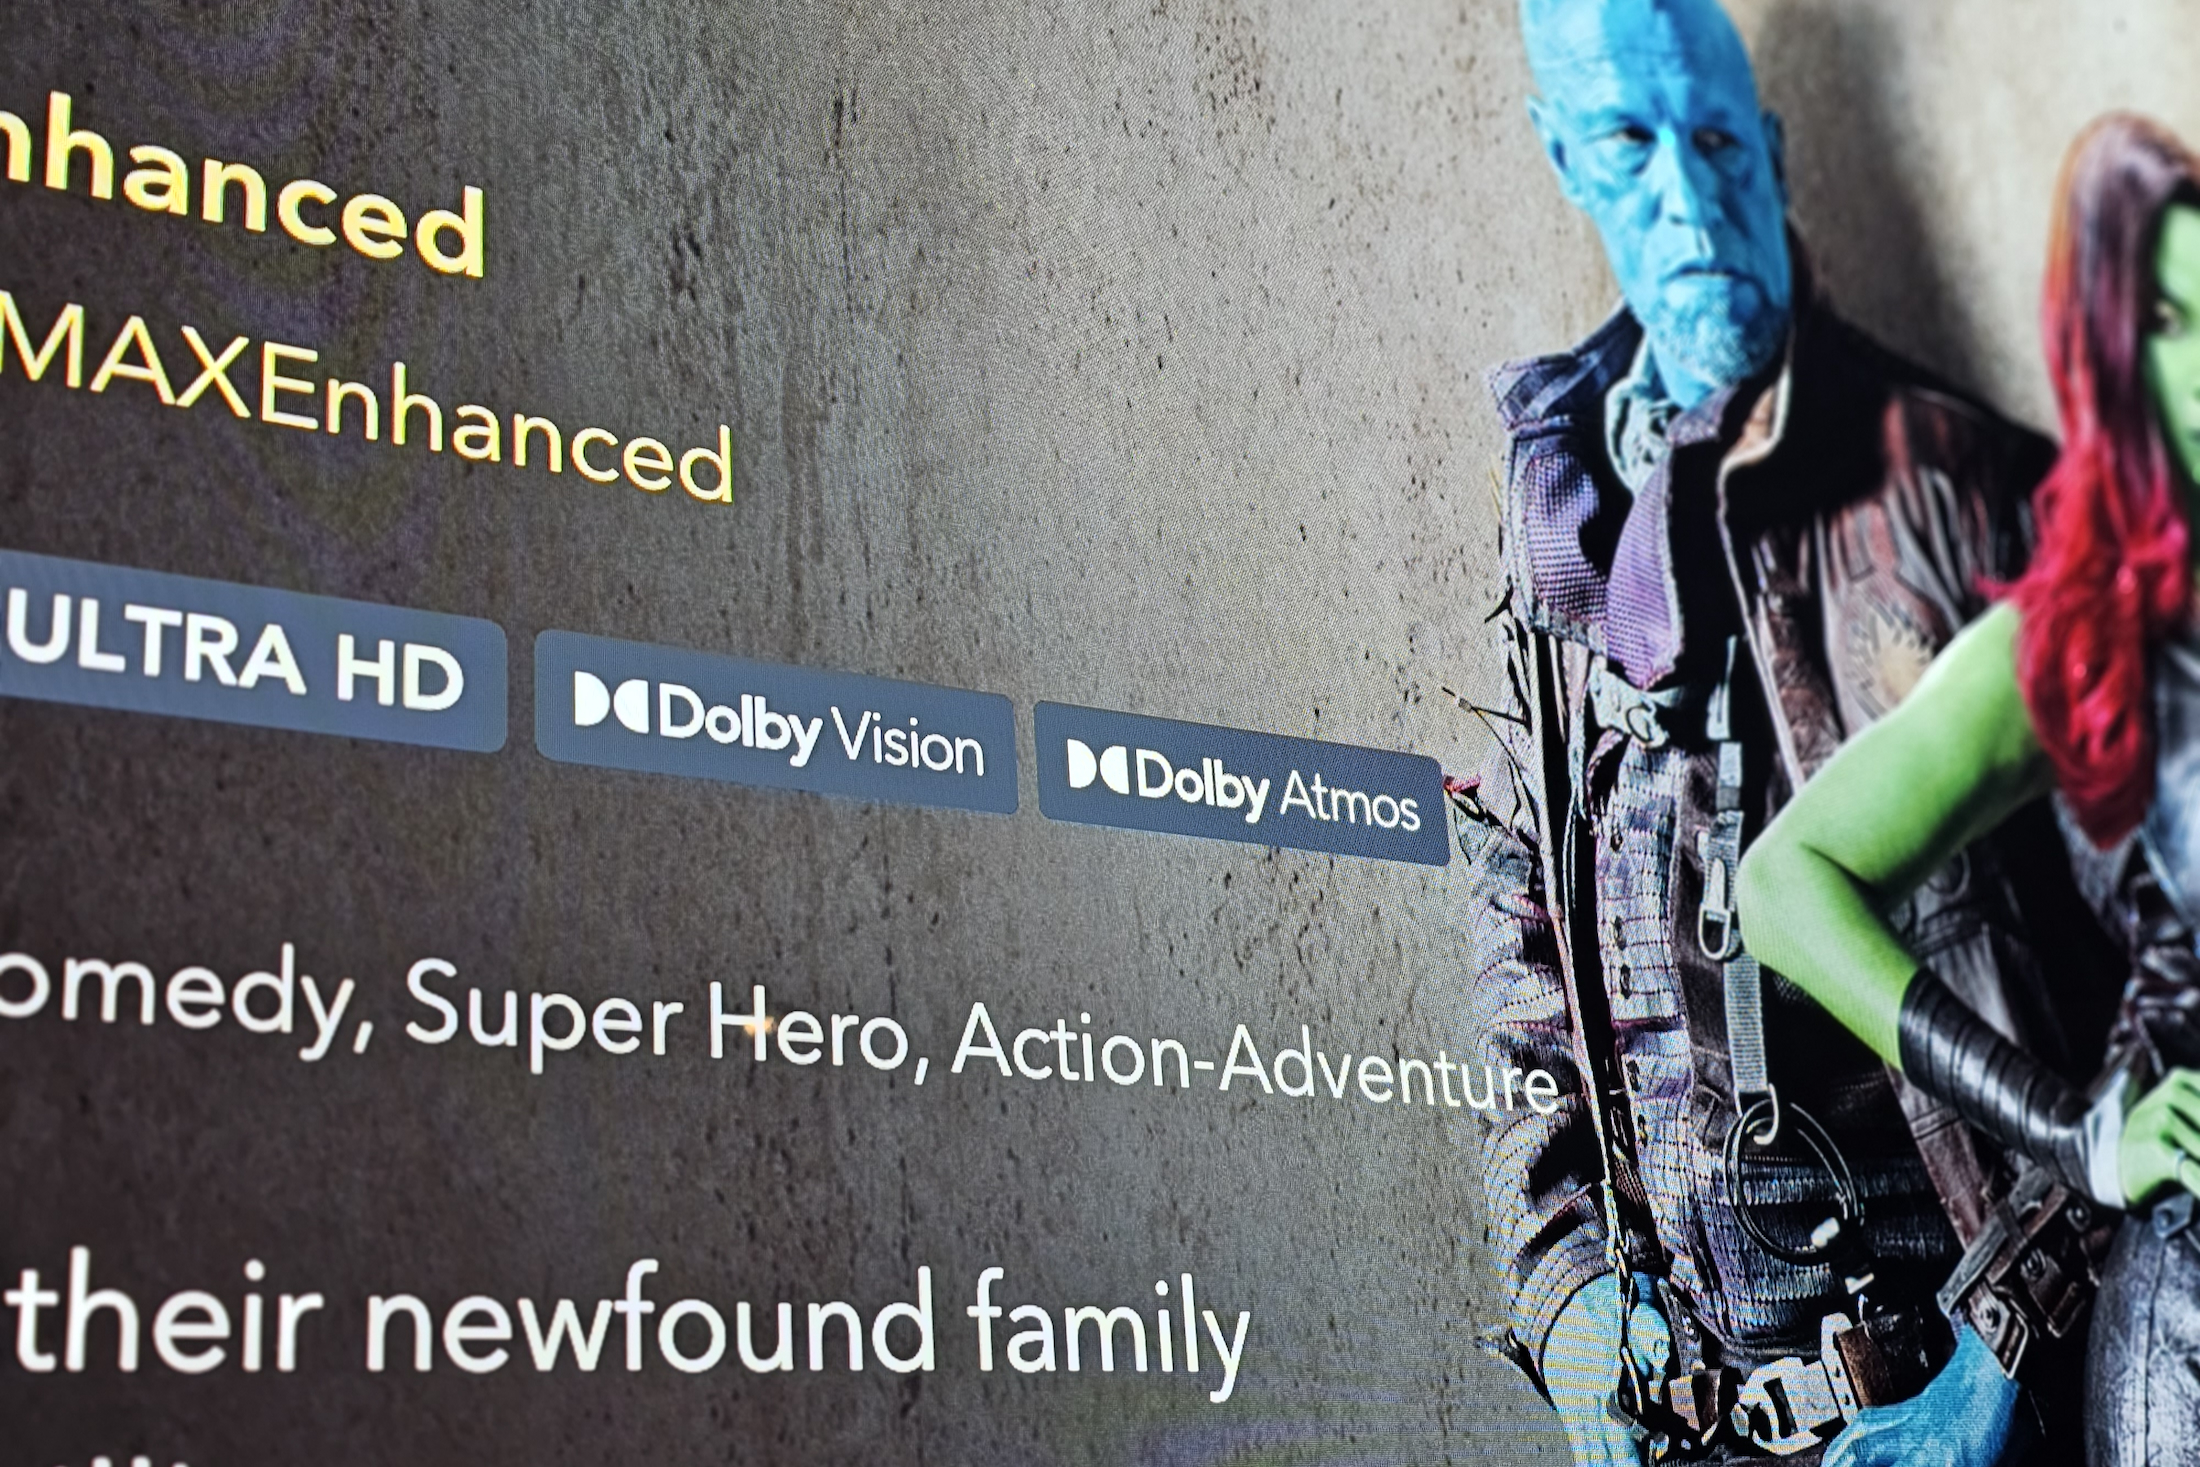 Photo of Disney+ interface showing the info screen from Guardians of the Galaxy Vol. 2, featuring Dolby Vision and Dolby Atmos logos.